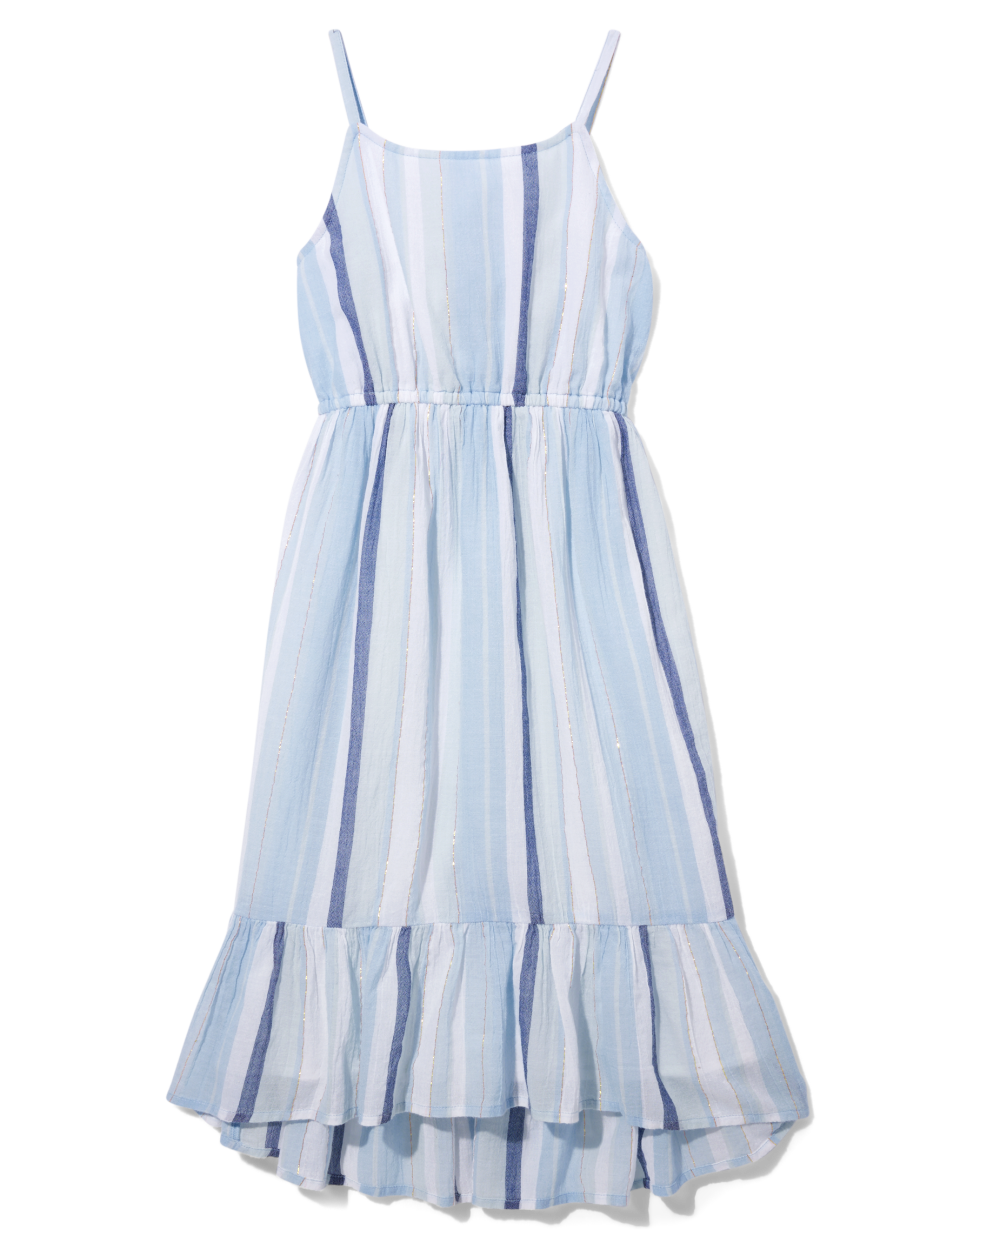 Girls Striped Print Sleeveless Spaghetti Strap Tiered Round Neck Smocked Above the Knee Dress With Ruffles